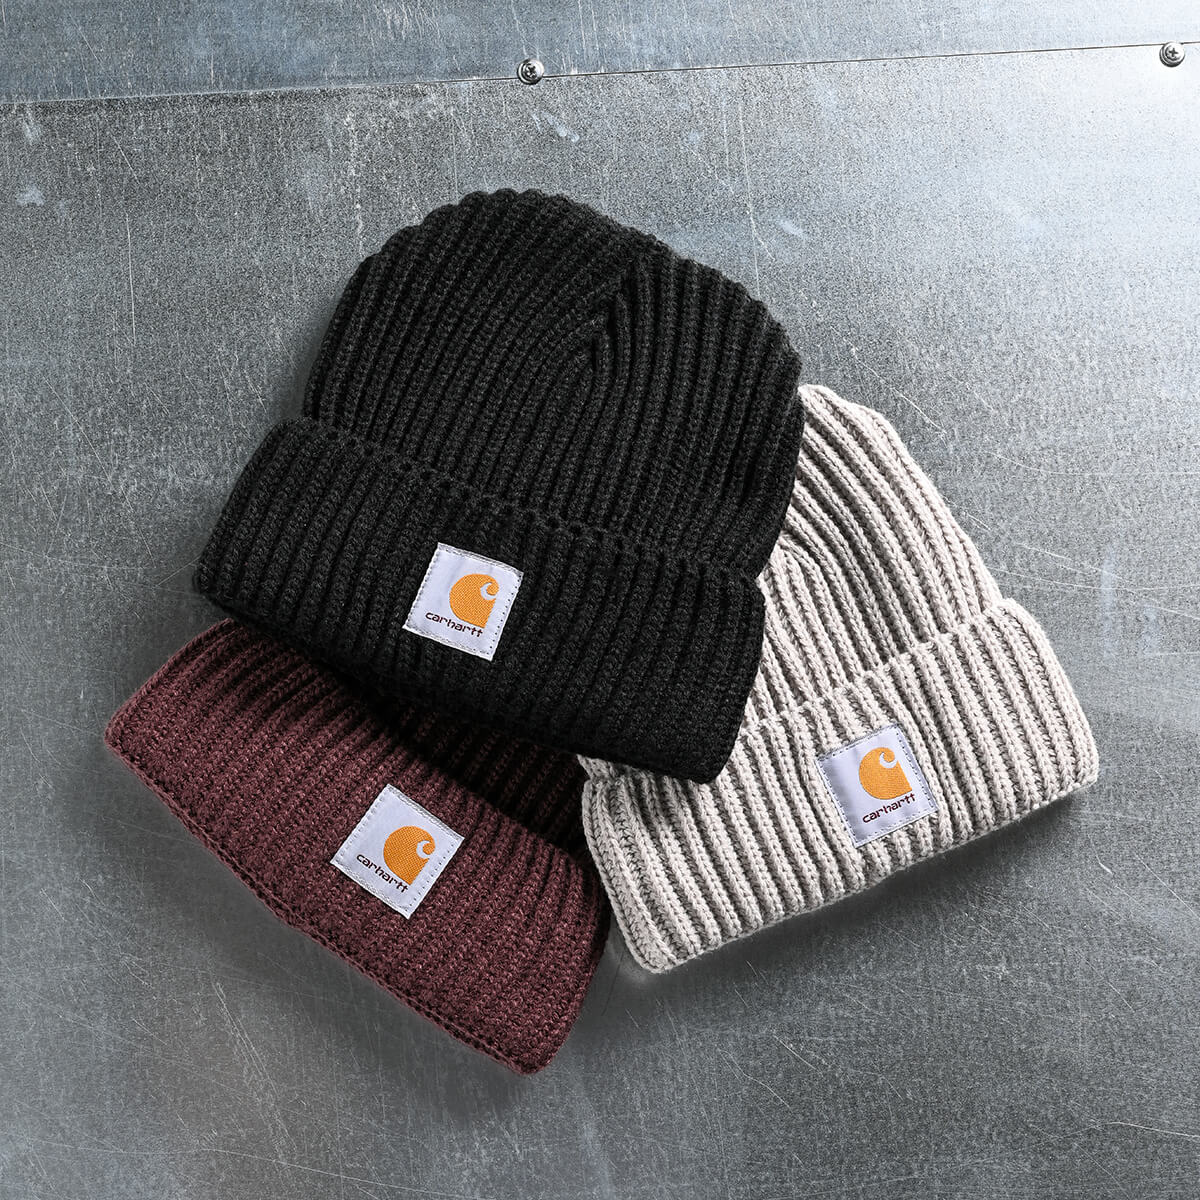 NEW ARRIVAL BEANIES FROM CARHARDTT & MORE - SHOP BEANIES